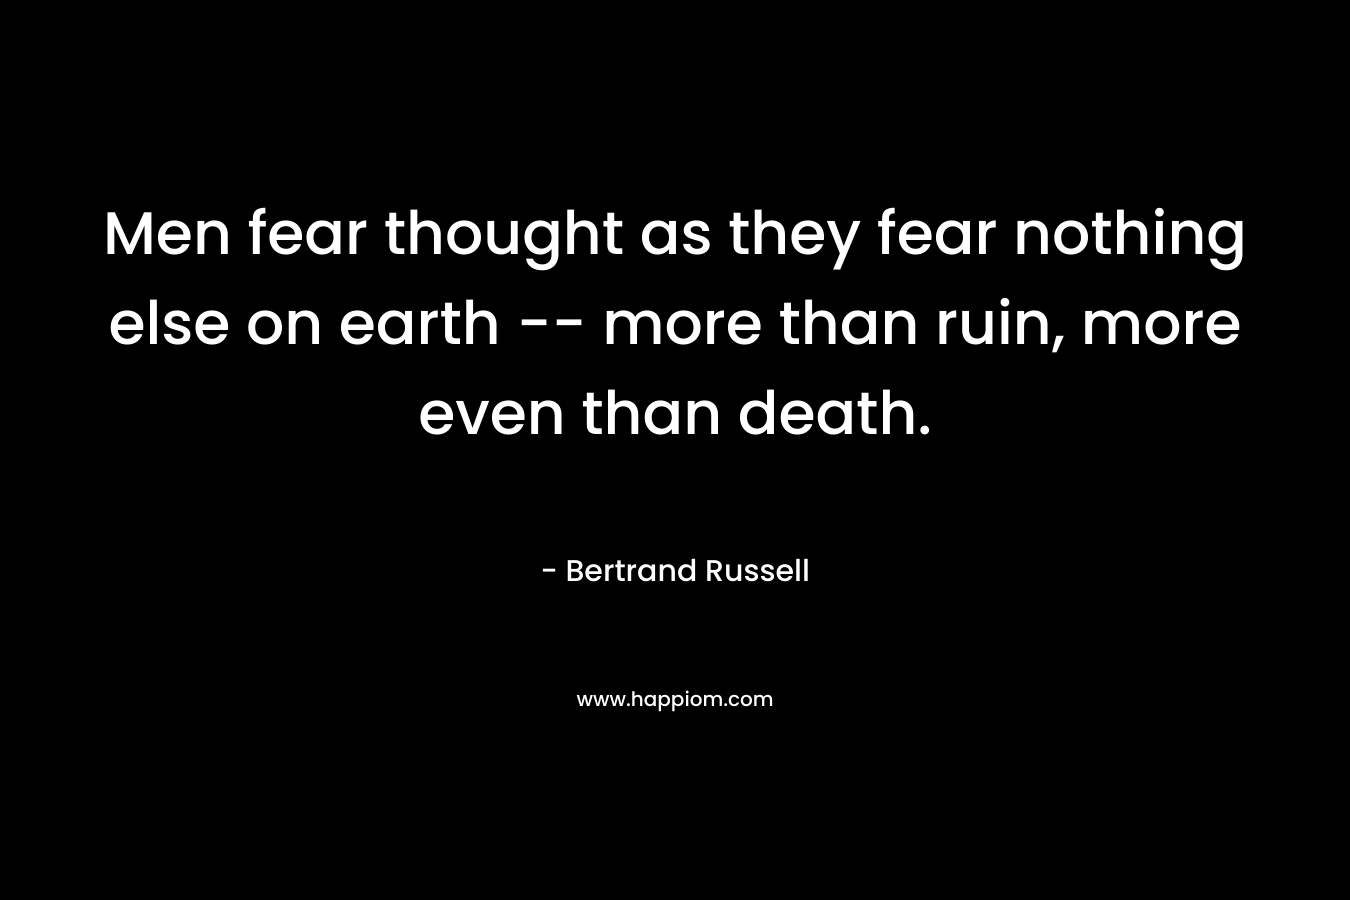 Men fear thought as they fear nothing else on earth -- more than ruin, more even than death.